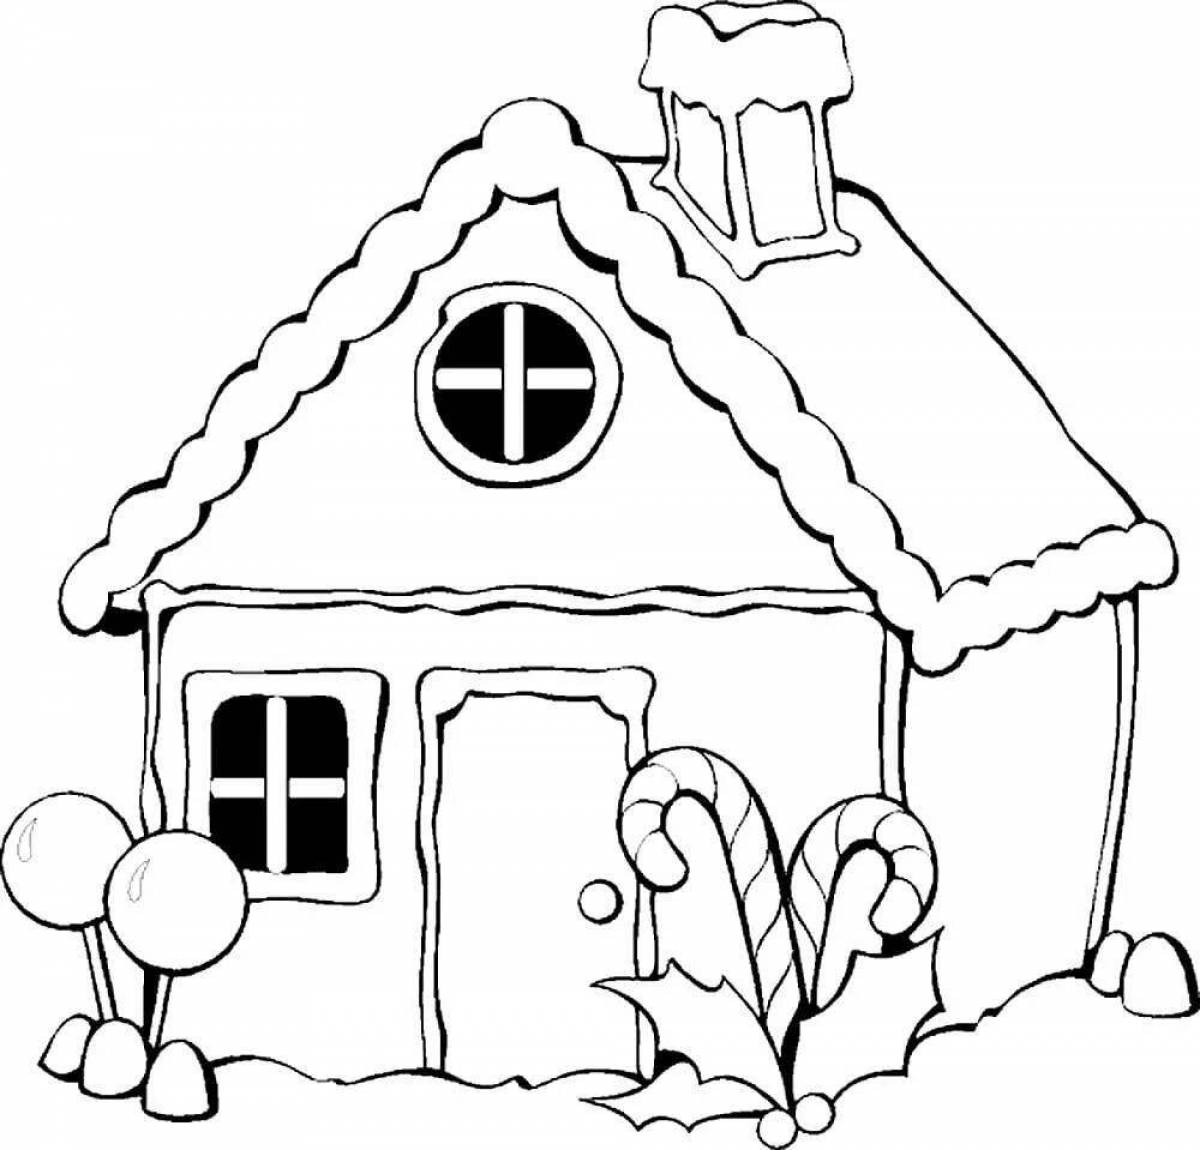 Coloring book luxury Christmas house